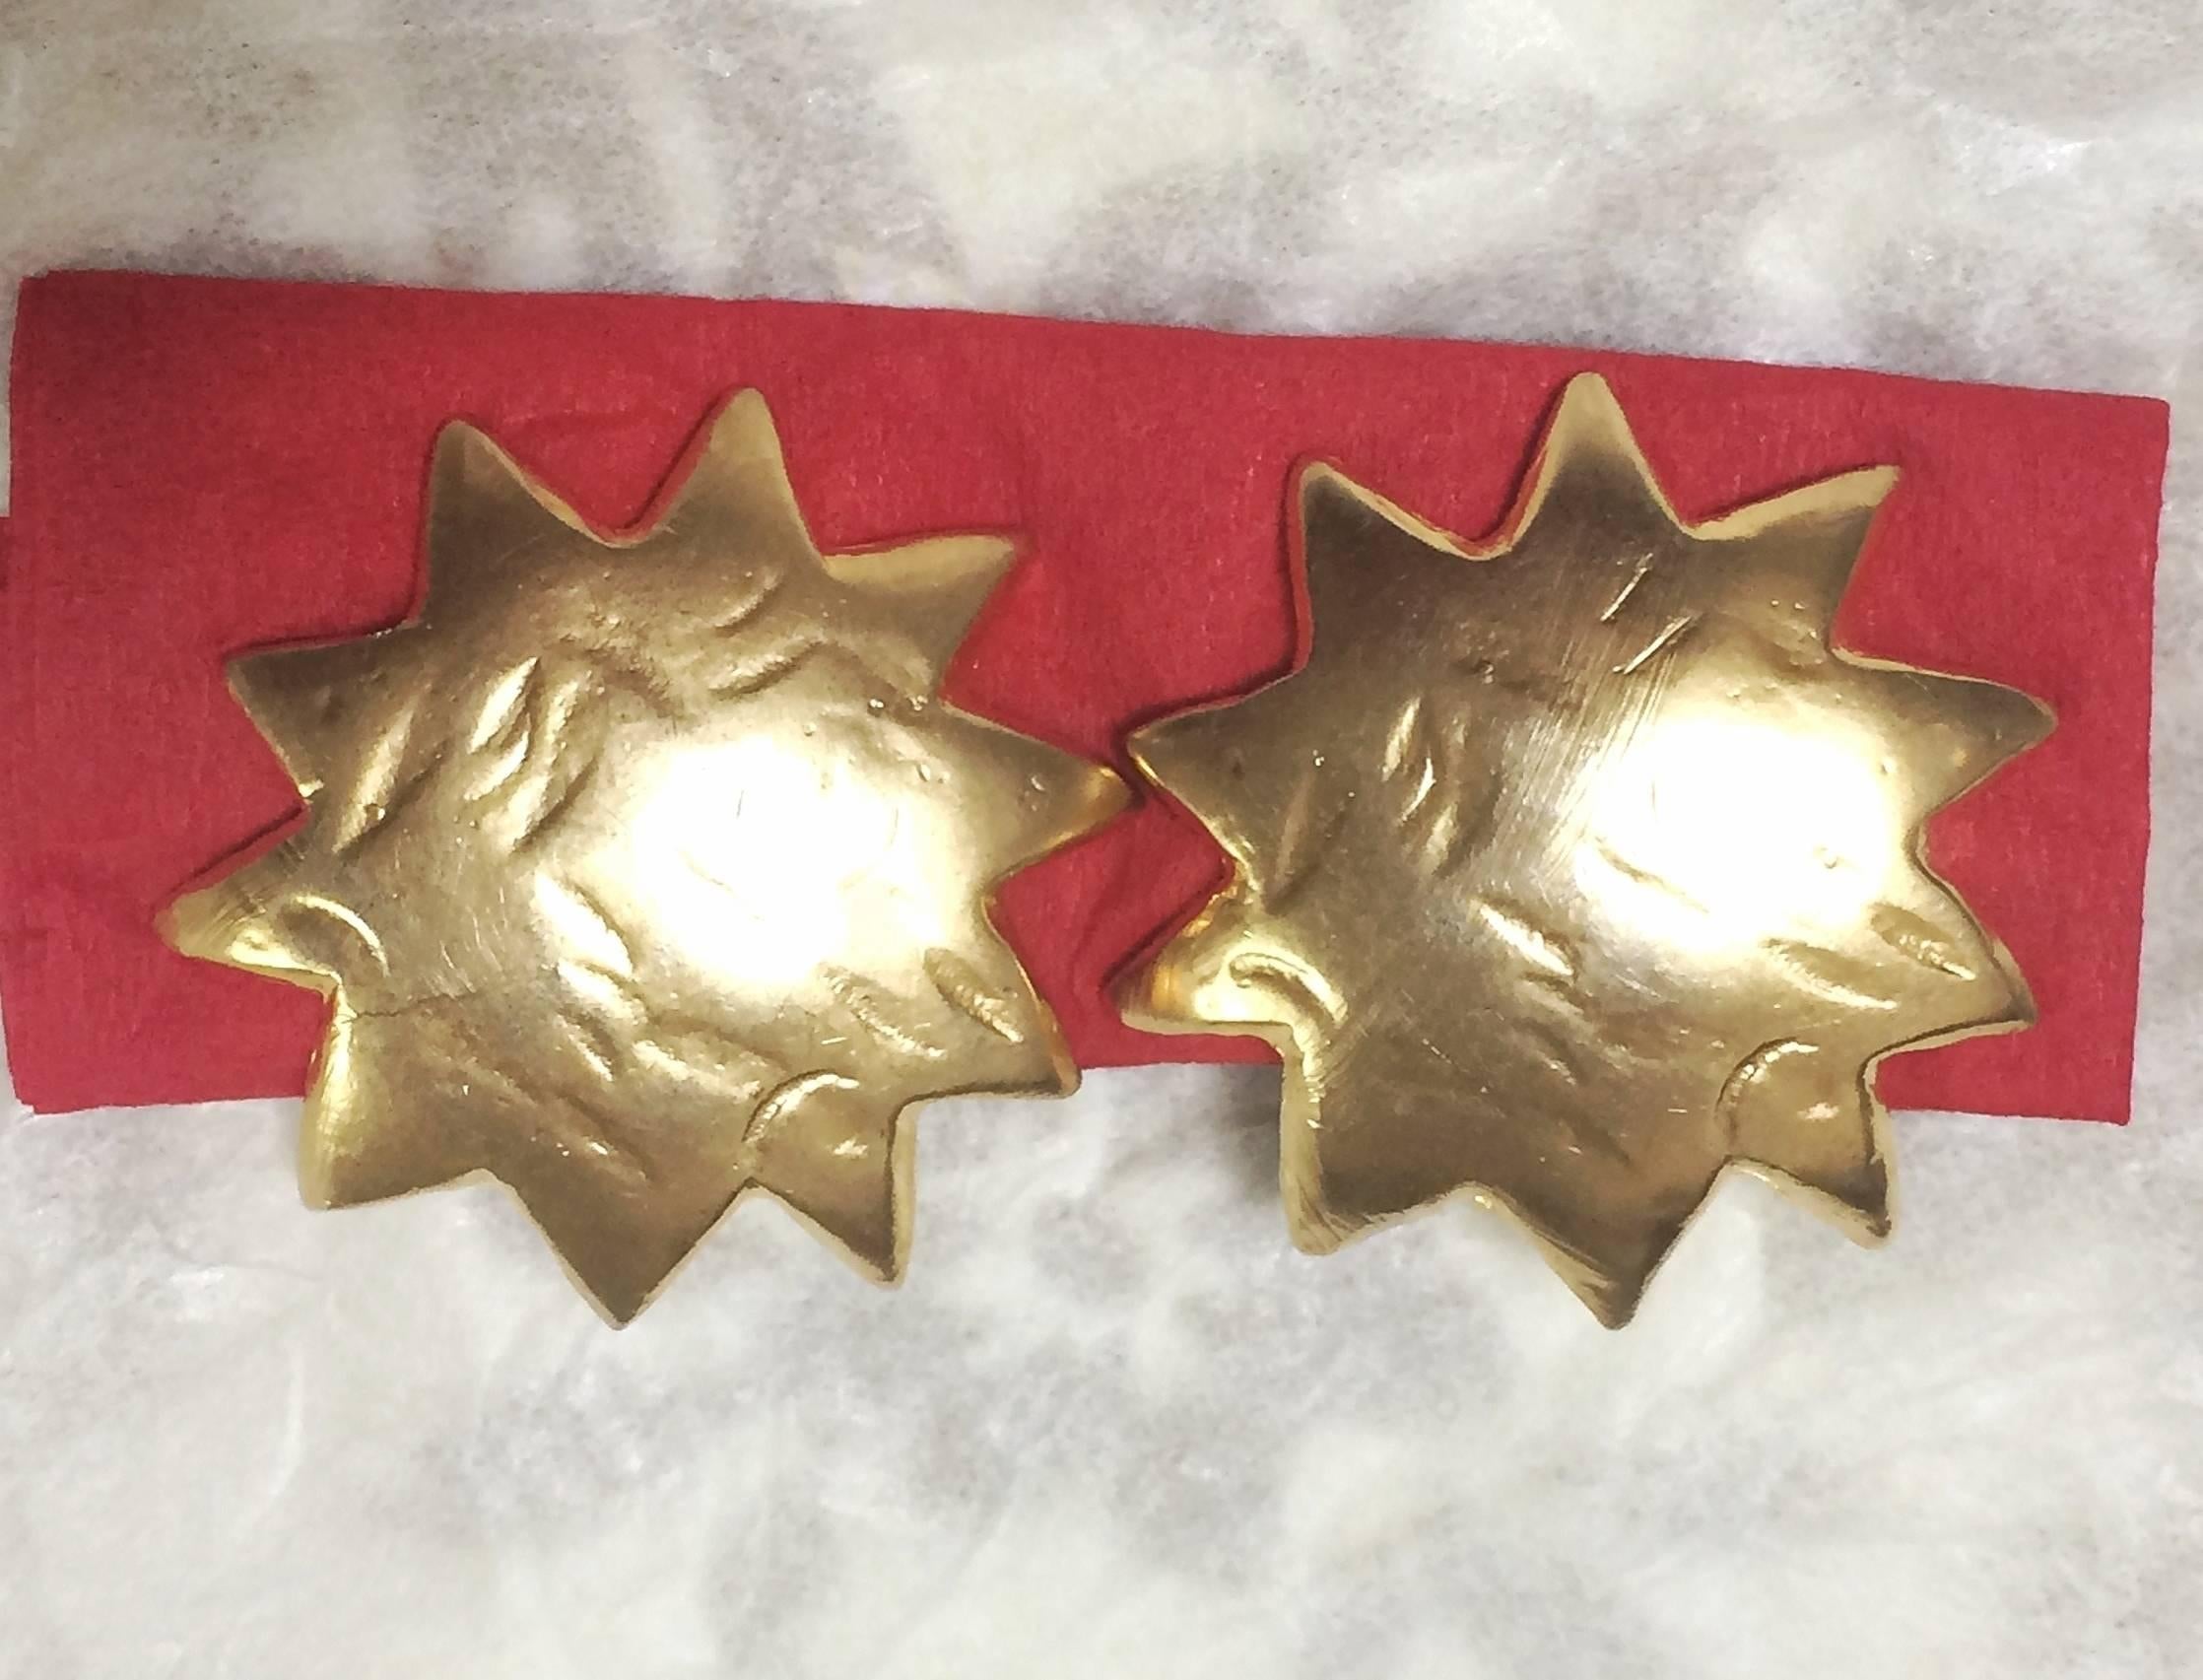 1990s. Vintage KENZO golden sun, star shape mod earrings. Chic, mod, and rare masterpiece jewelry. Great gift idea.

Introducing a chic and mod clipping style earring set from KENZO, back in the 90's.
You will love its cute shape like sun/ star